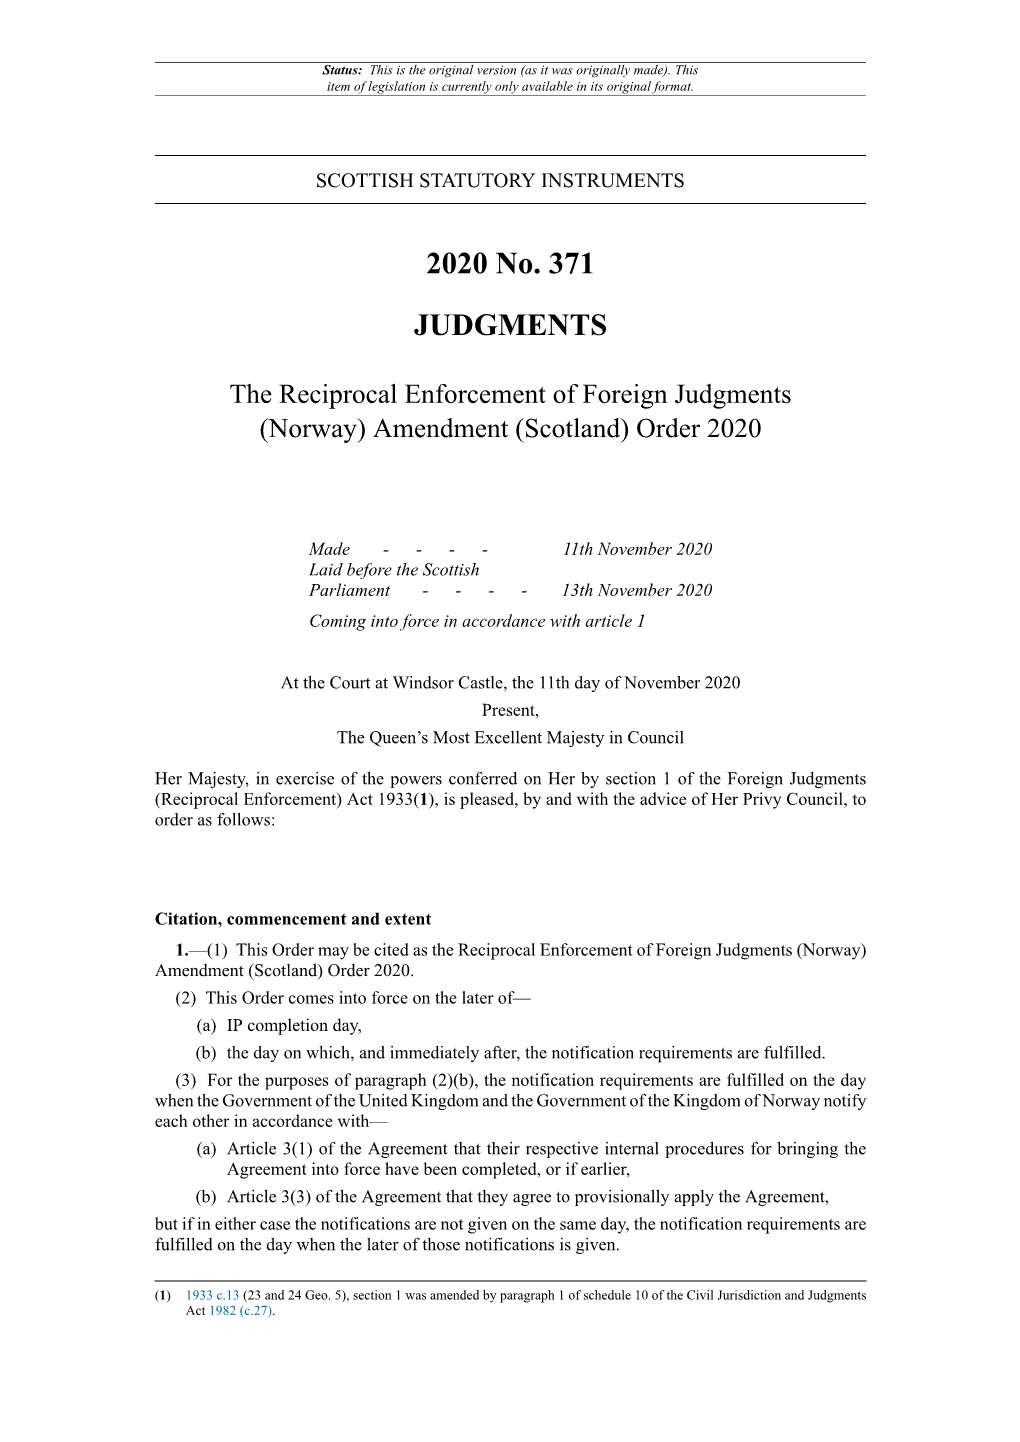 The Reciprocal Enforcement of Foreign Judgments (Norway) Amendment (Scotland) Order 2020